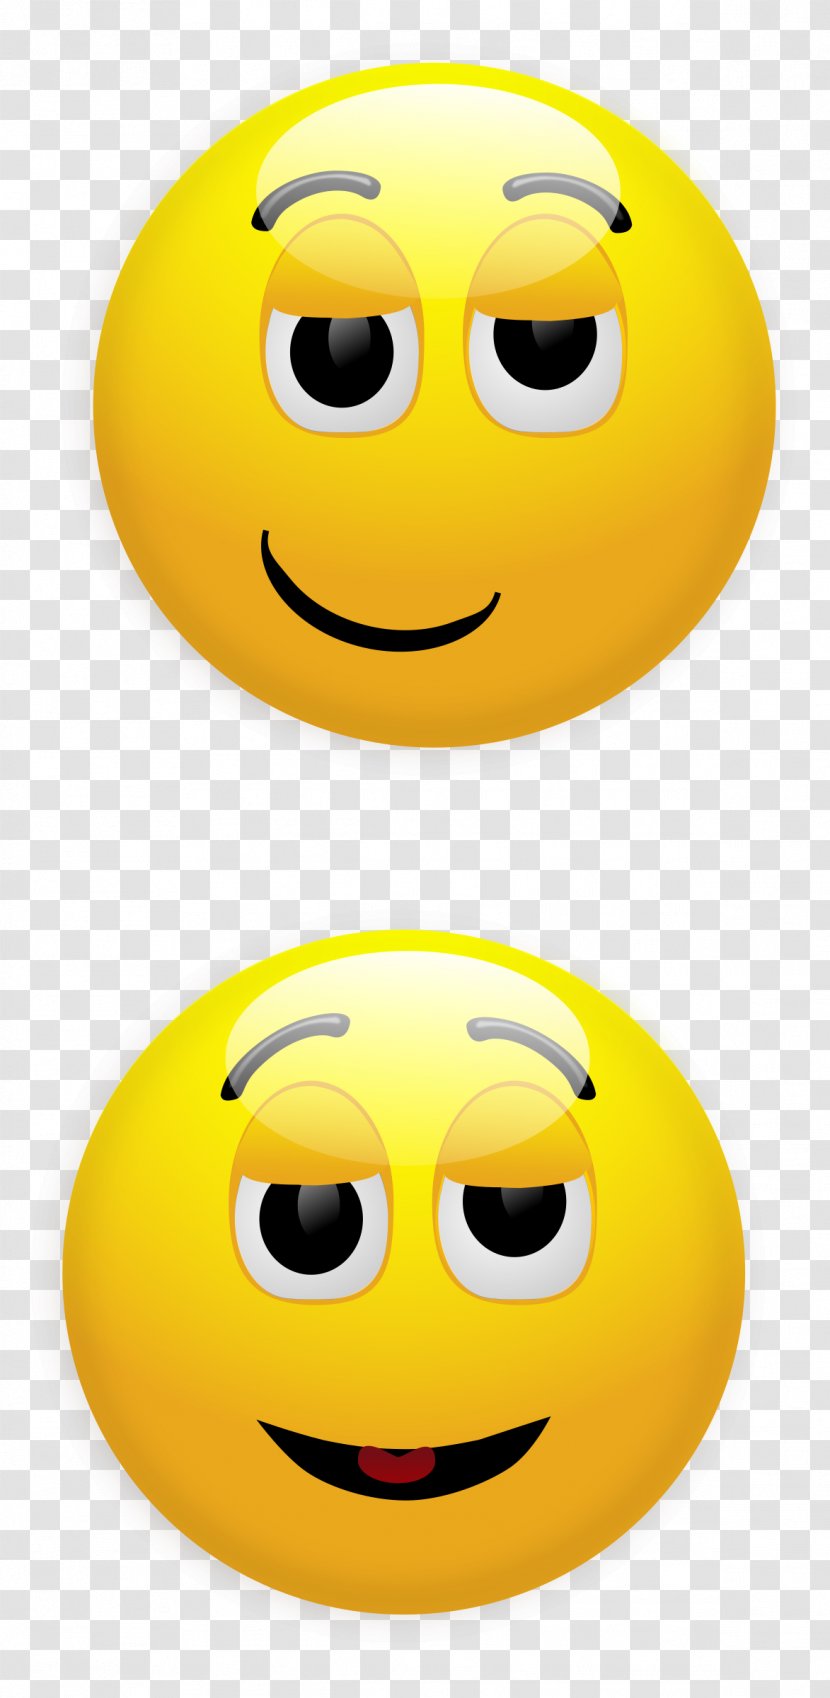 Smiley Emoticon Clip Art - Happiness - Mouth Smile Transparent PNG